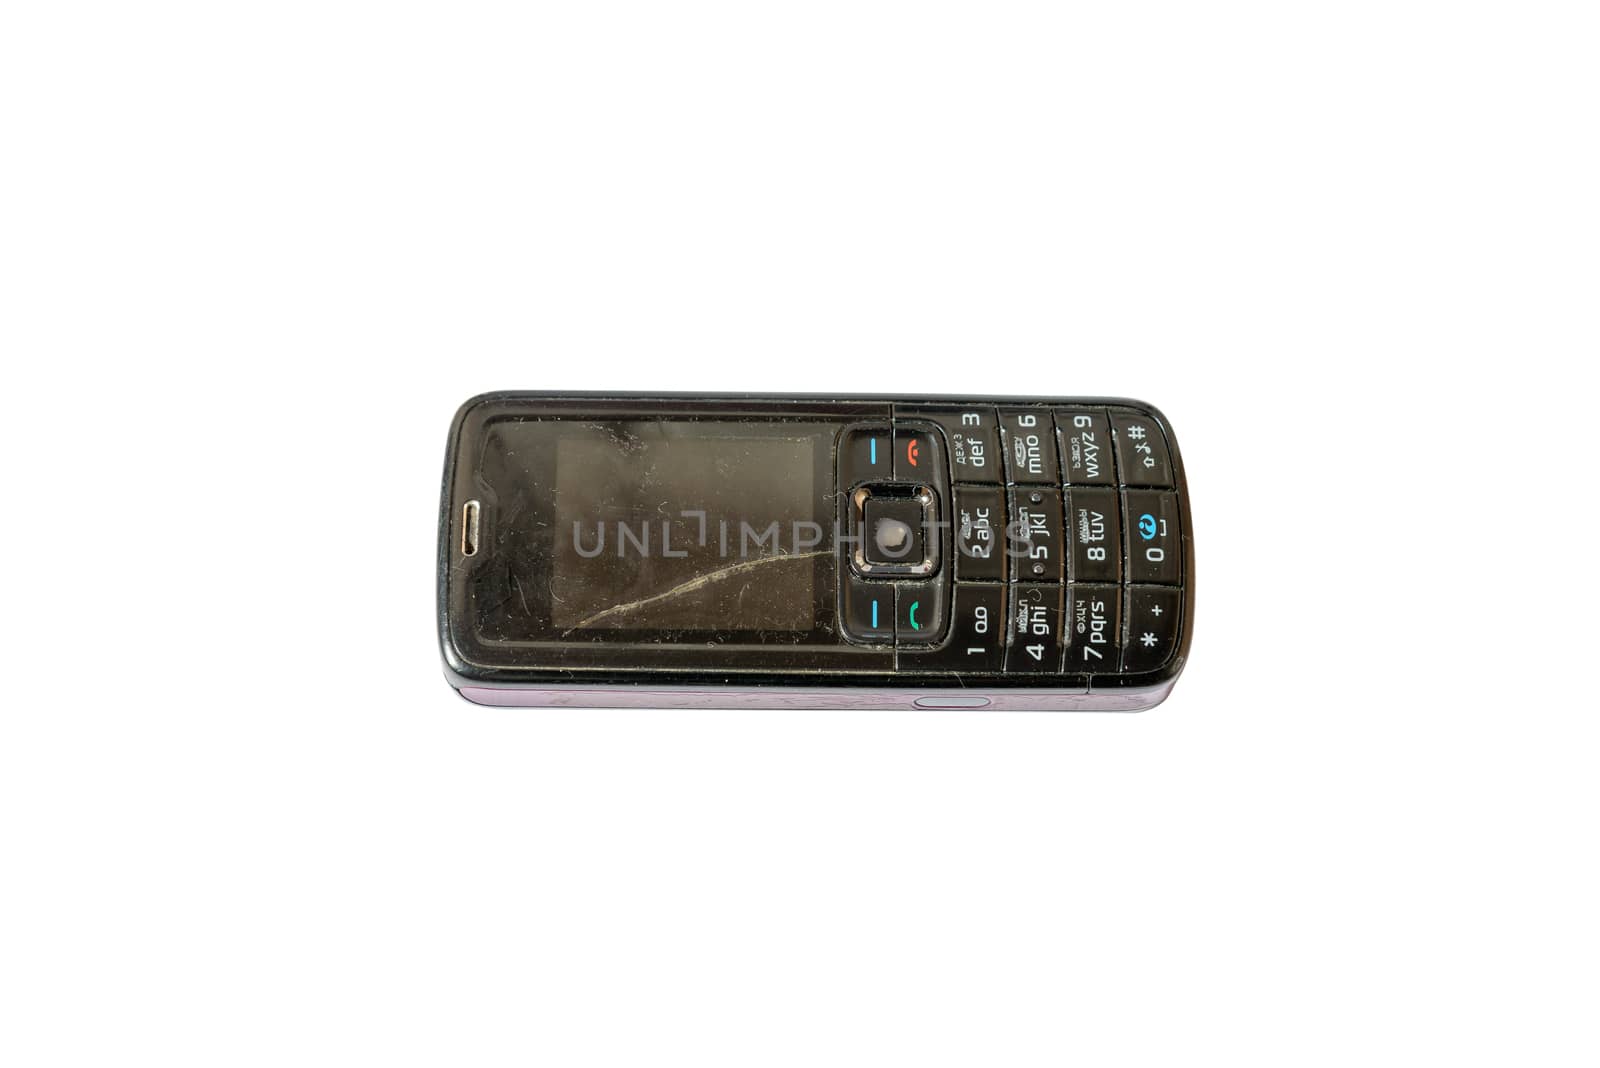 Old mobile phone white background